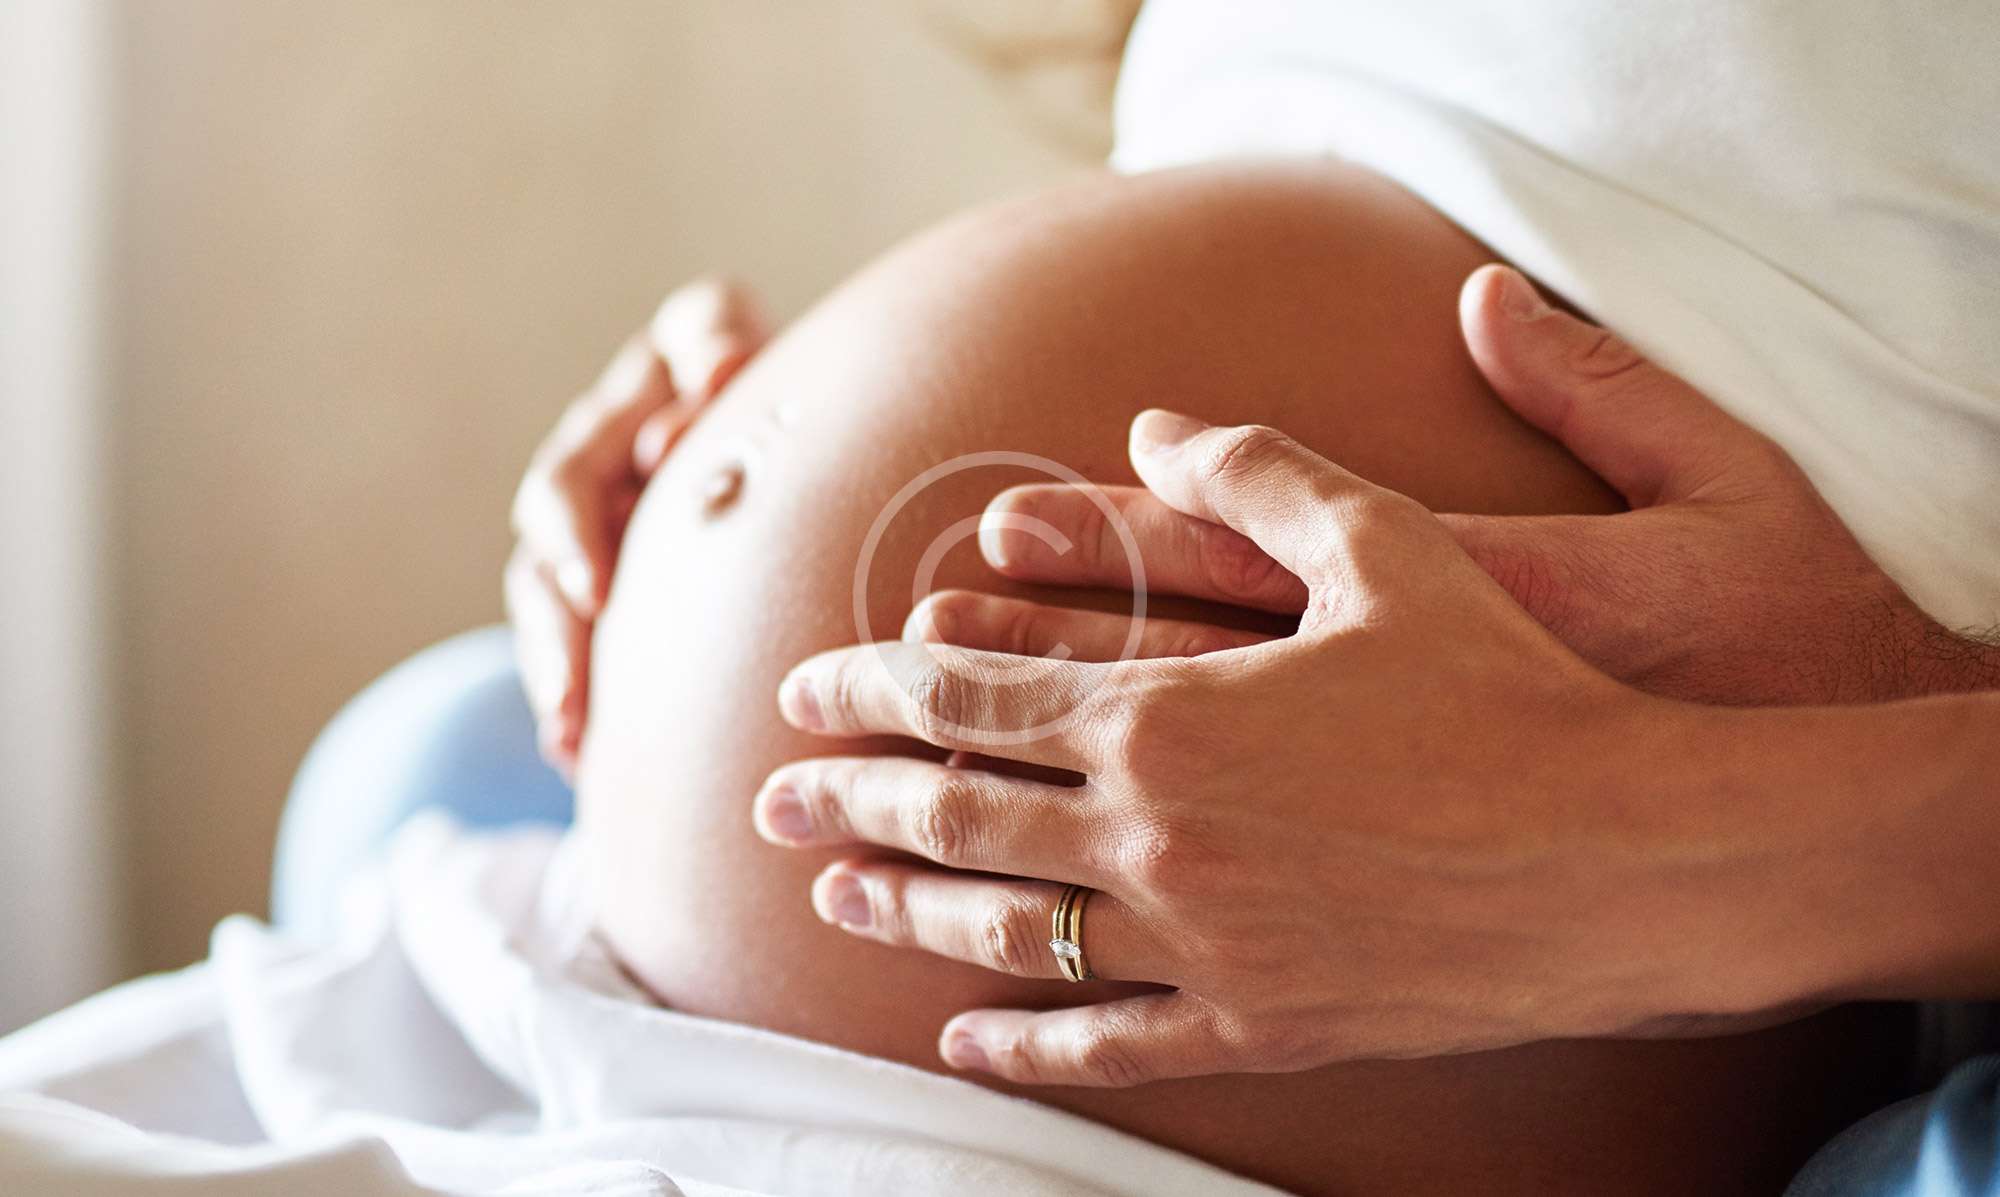 7 Tips for Having a Natural Childbirth